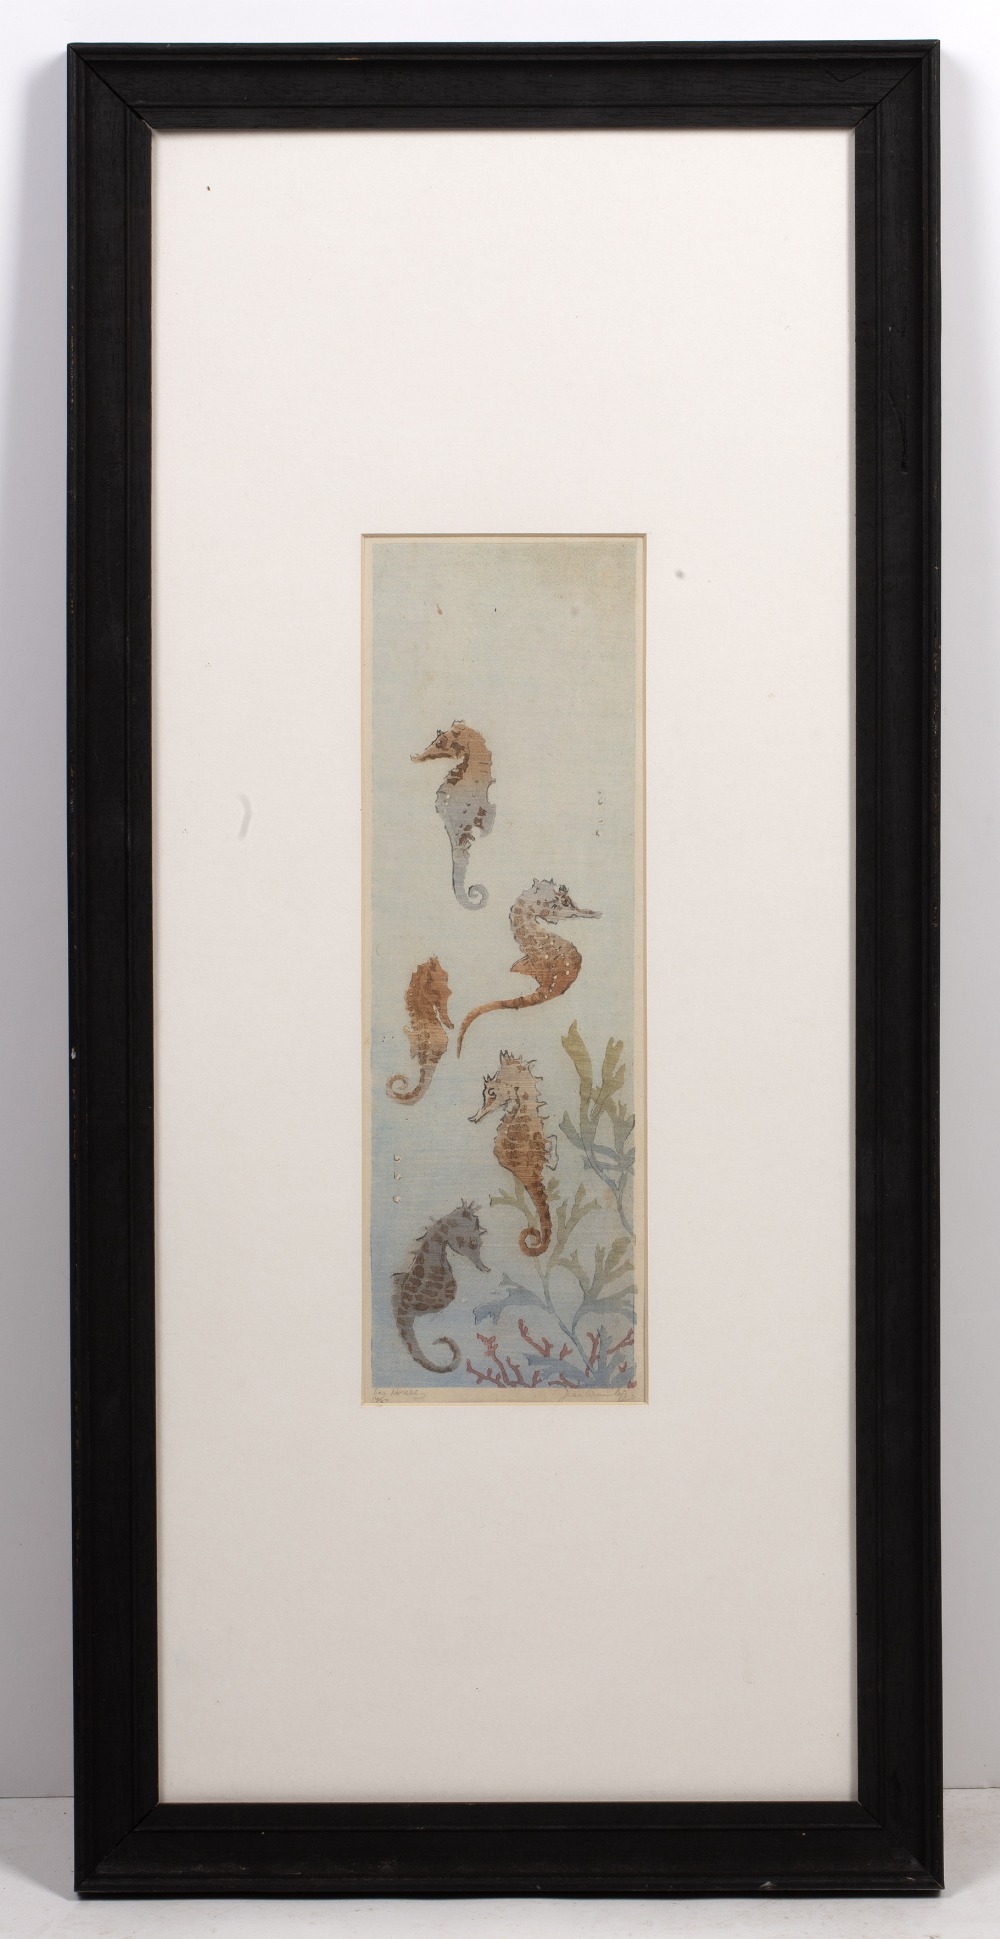 Jean Armitage (1895-1988) Sea Horses 1450, signed, titled, and numbered in pencil (in the margin) - Image 2 of 3